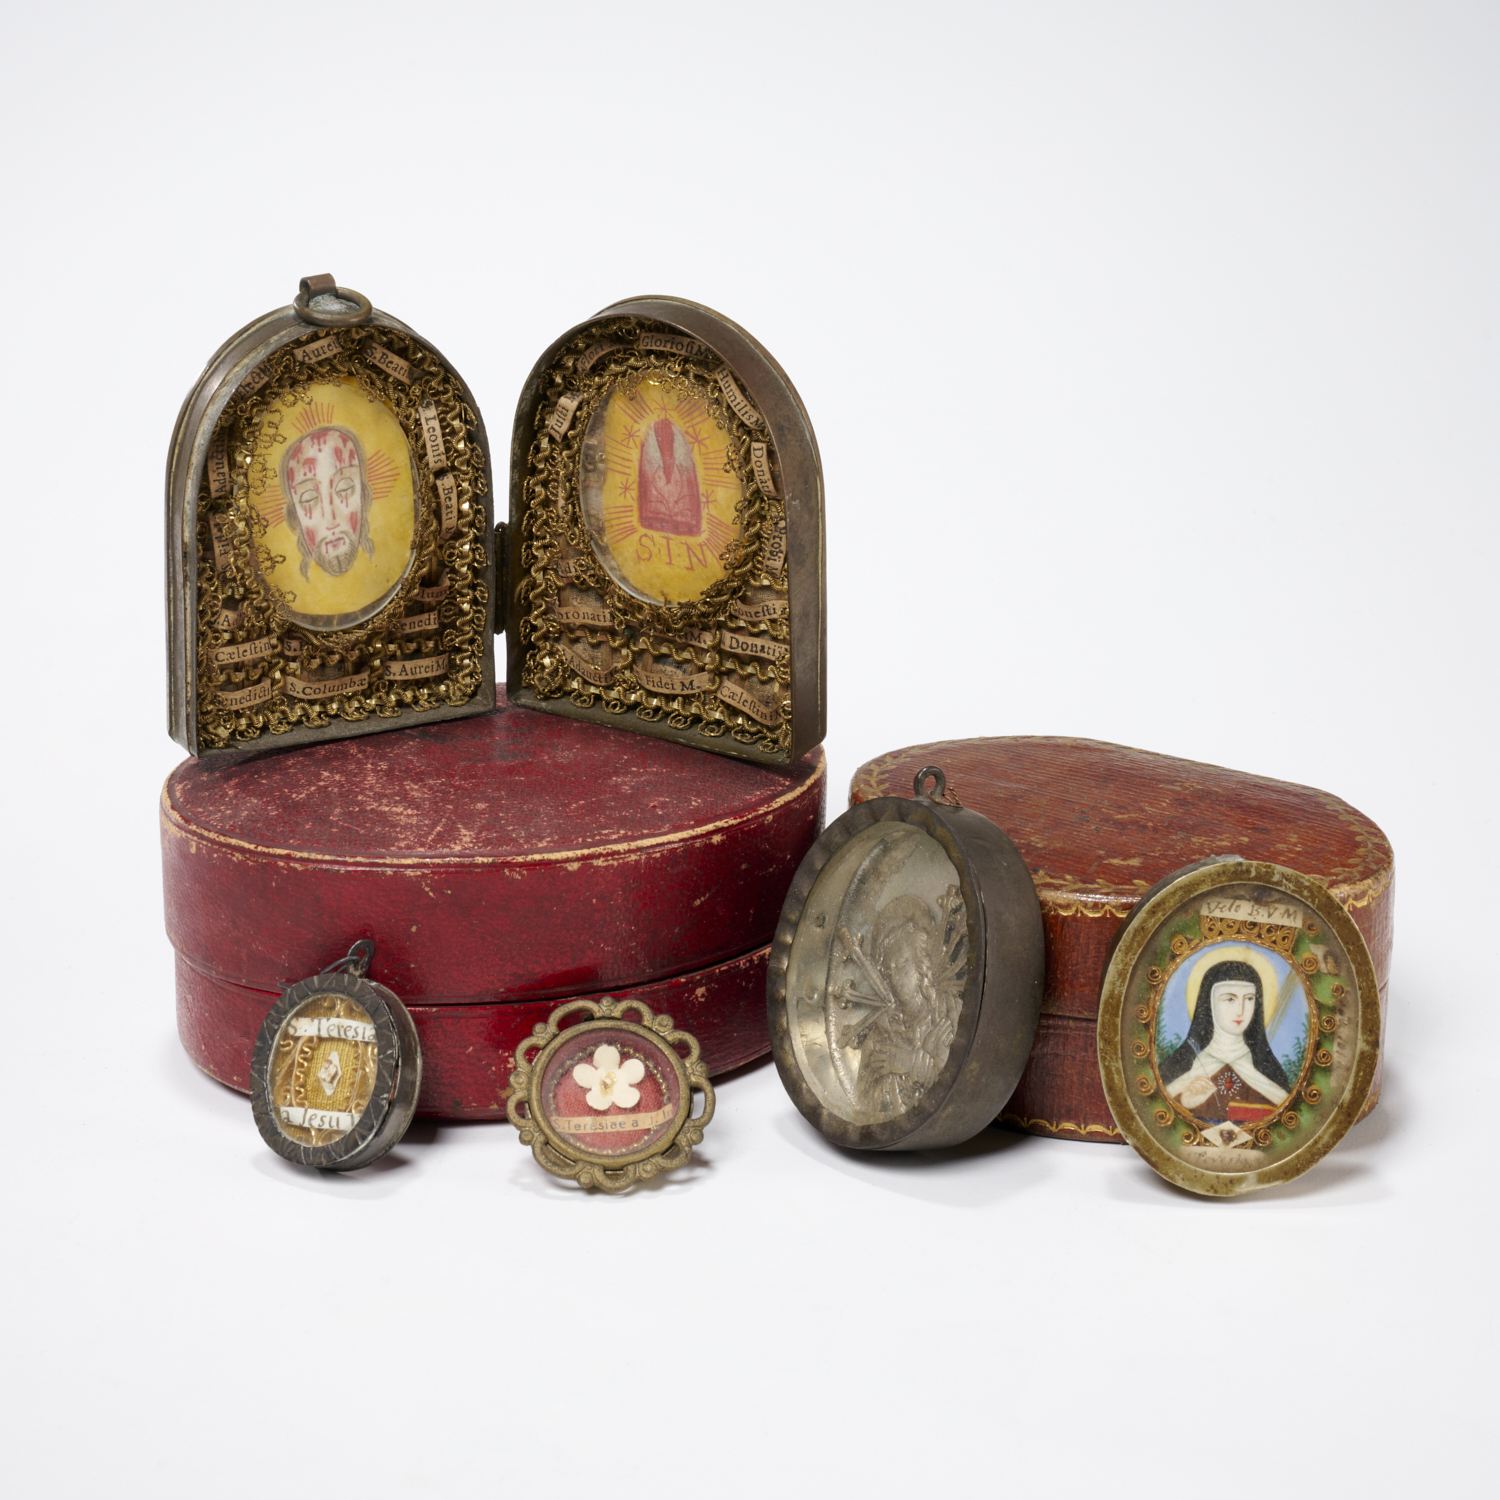  5 CONTINENTAL RELIQUARIES AND 3ce56d